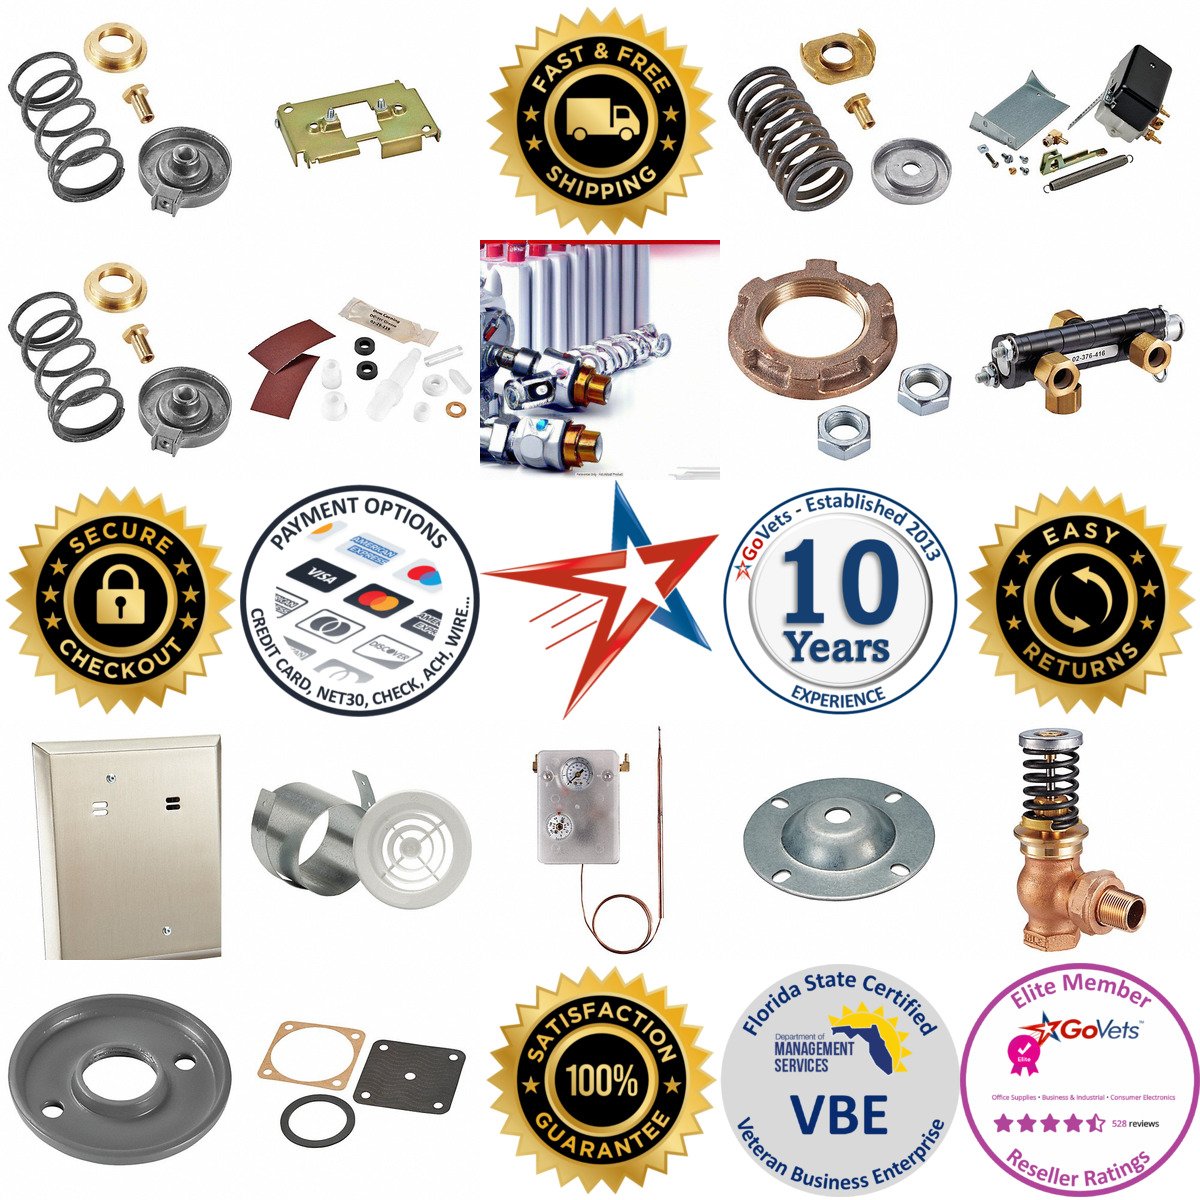 A selection of Pneumatic Control Accessories products on GoVets